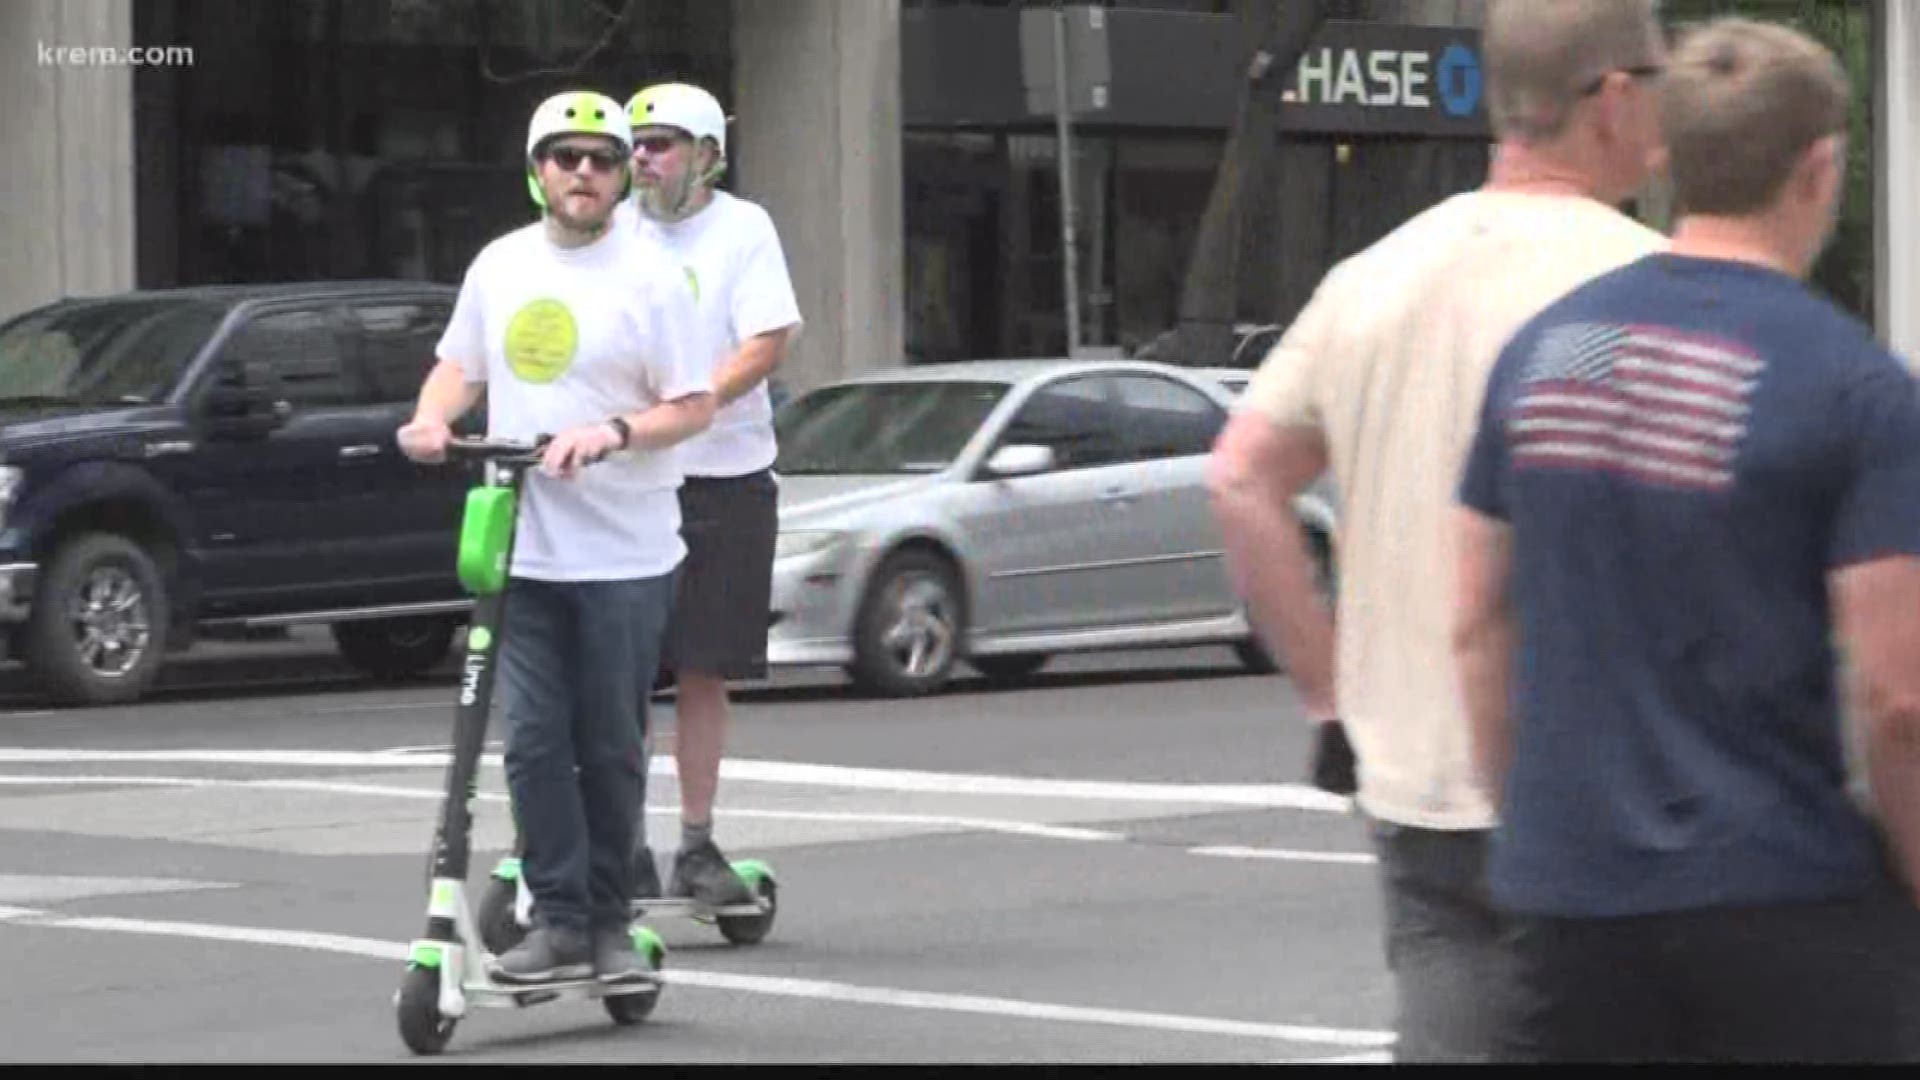 The Lime Bike and Scooter service started a new program. It's called Lime Patrol. Staff members will ride around downtown Spokane to make sure people are using the bikes and scooters properly.